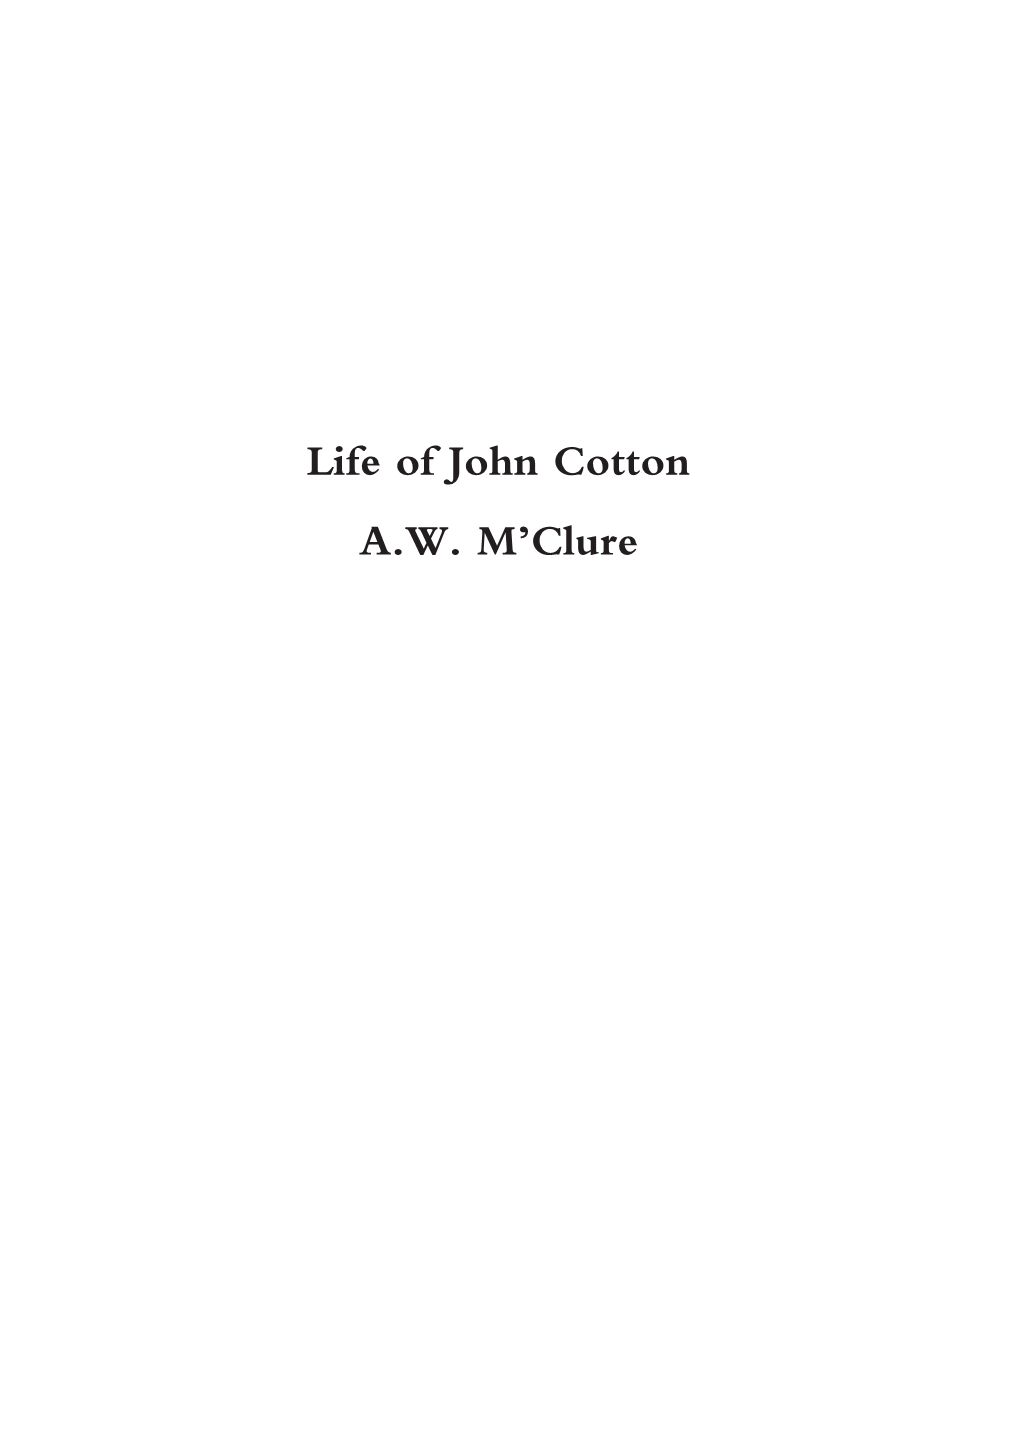 Life of John Cotton A.W. M'clure